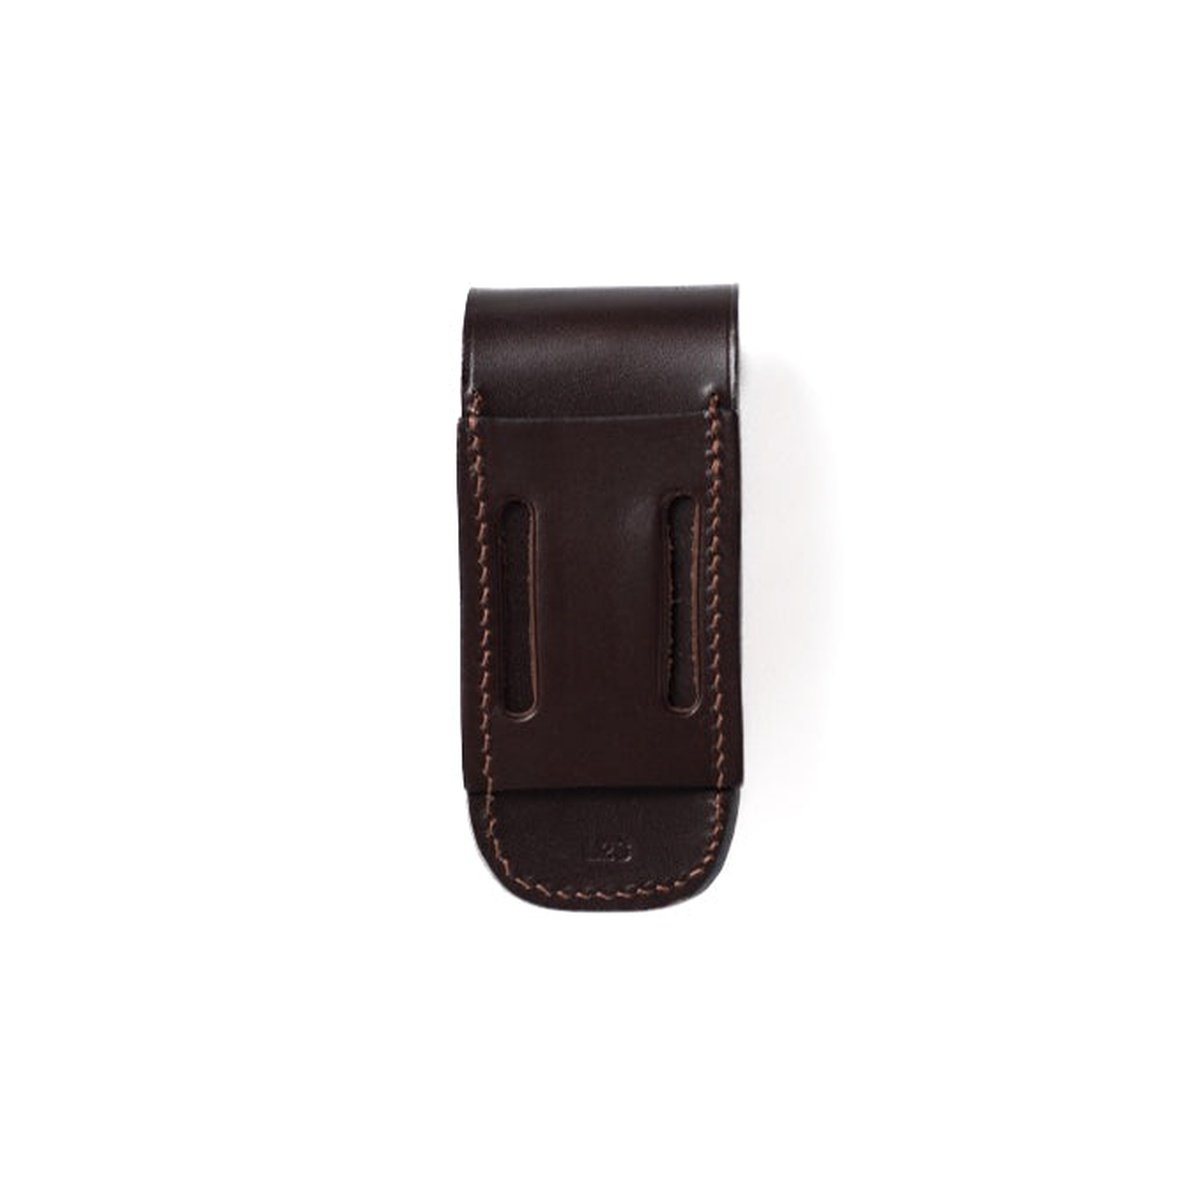 Leatherman Pouch Small- two clip